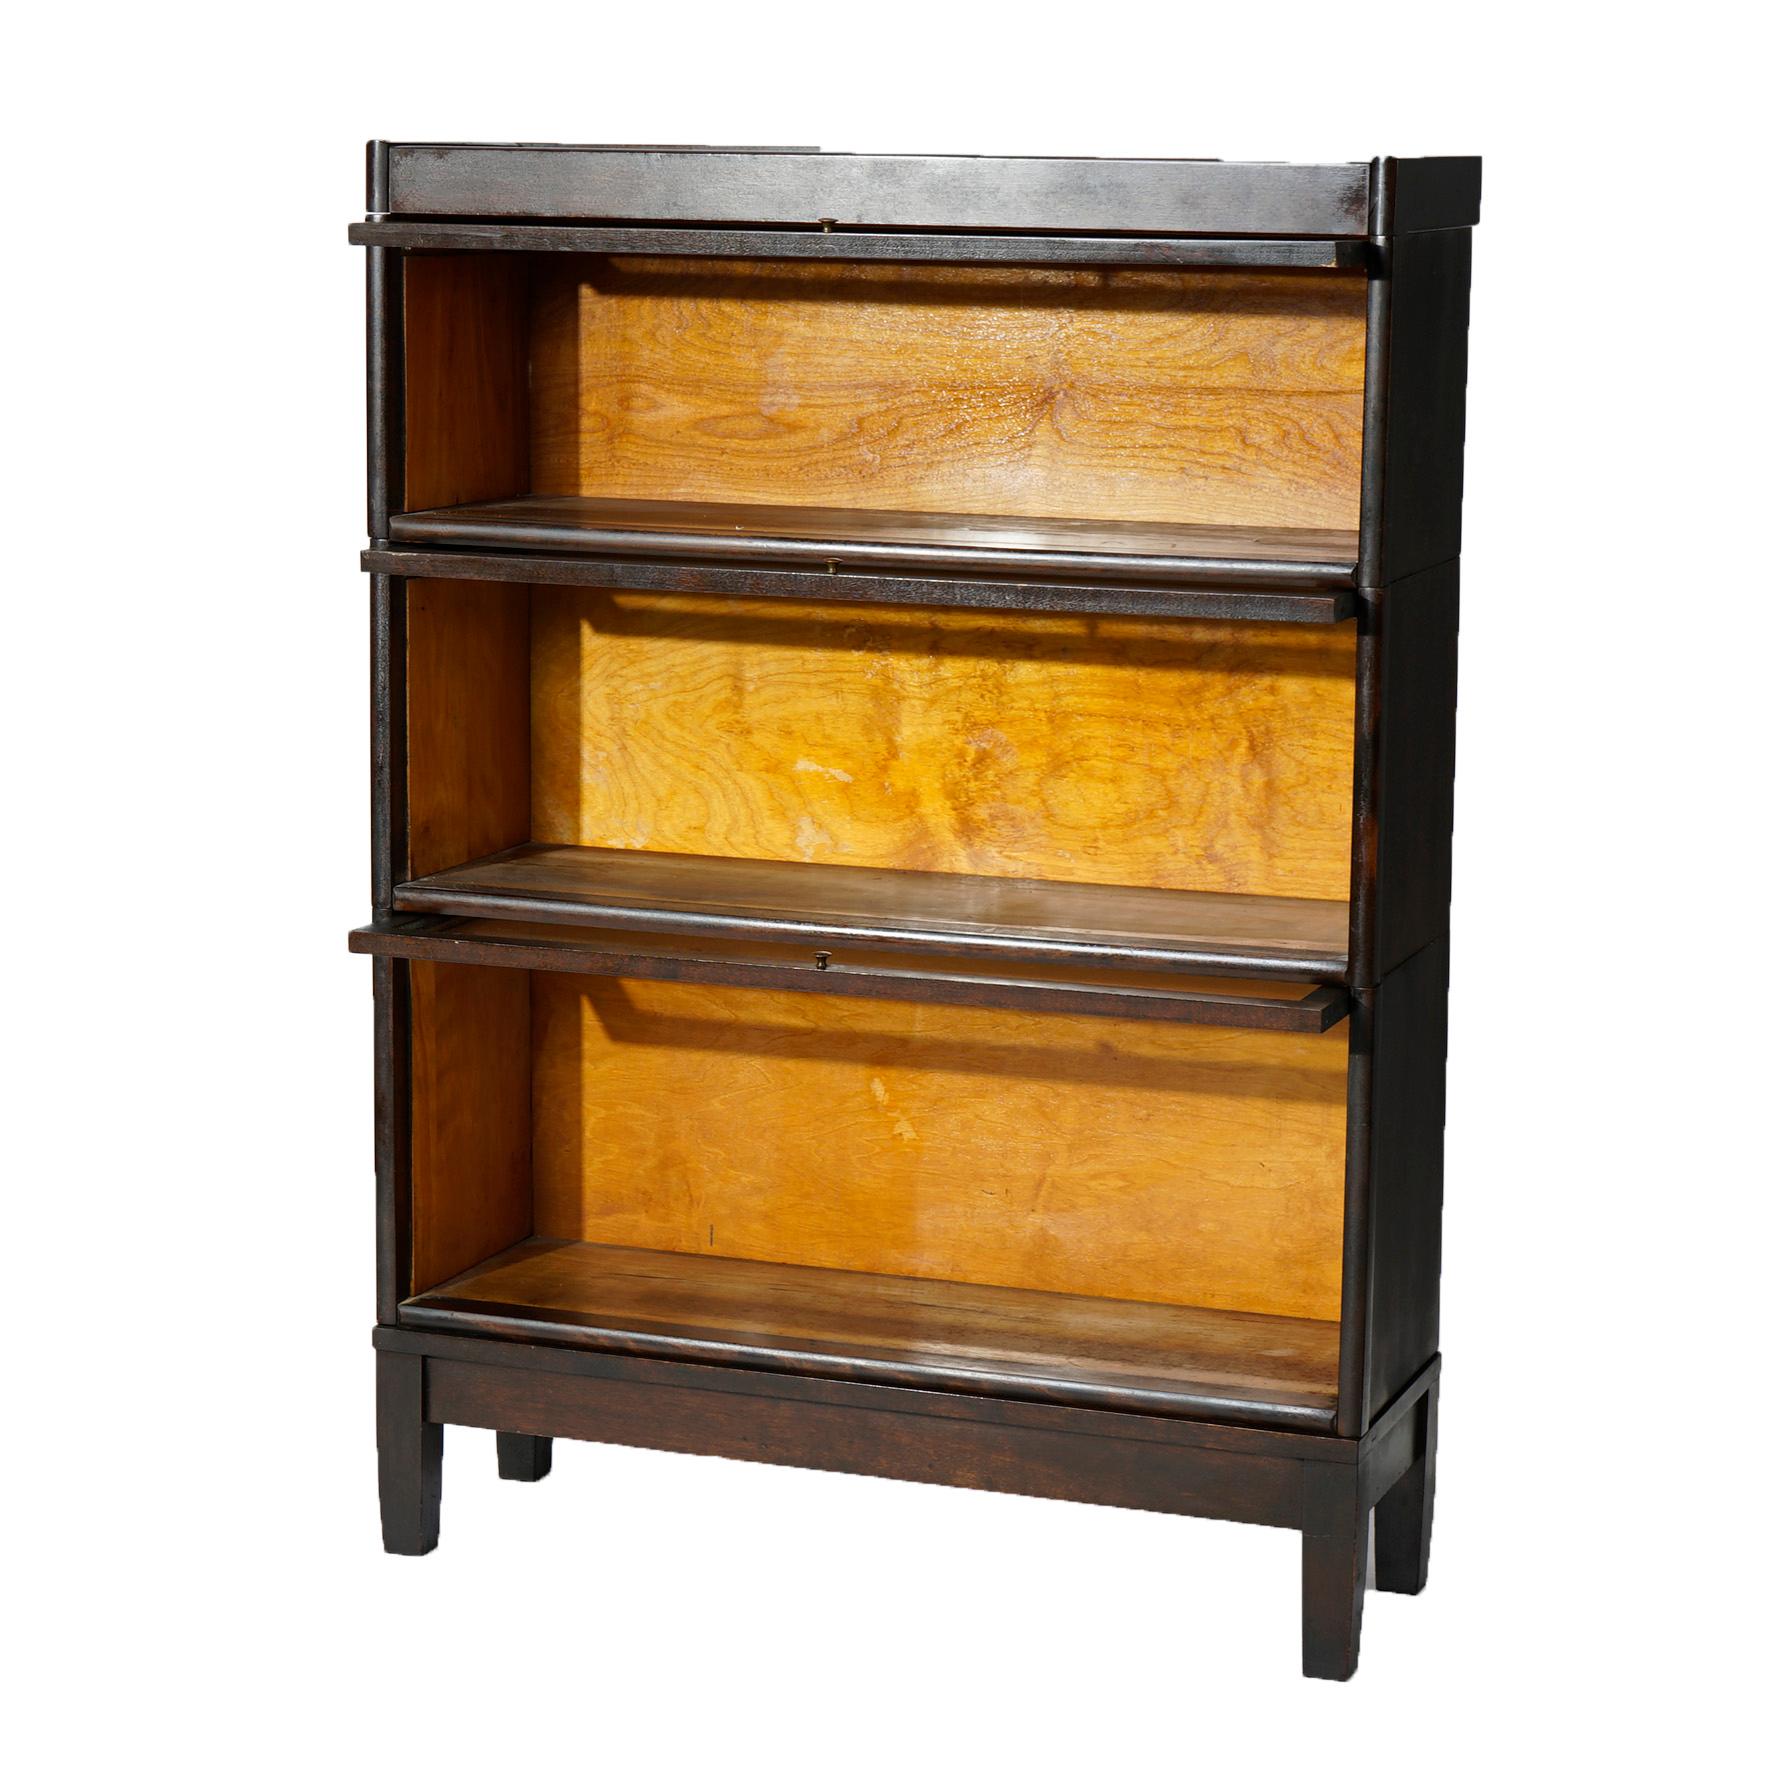 An antique Arts and Crafts Mission barrister bookcase in the manner of Globe Wernicke offers mahogany construction with three stacks, each having pull out glass shelves, raised on square and straight legs, c1910

Measures- 47.25''H x 34.25''W x